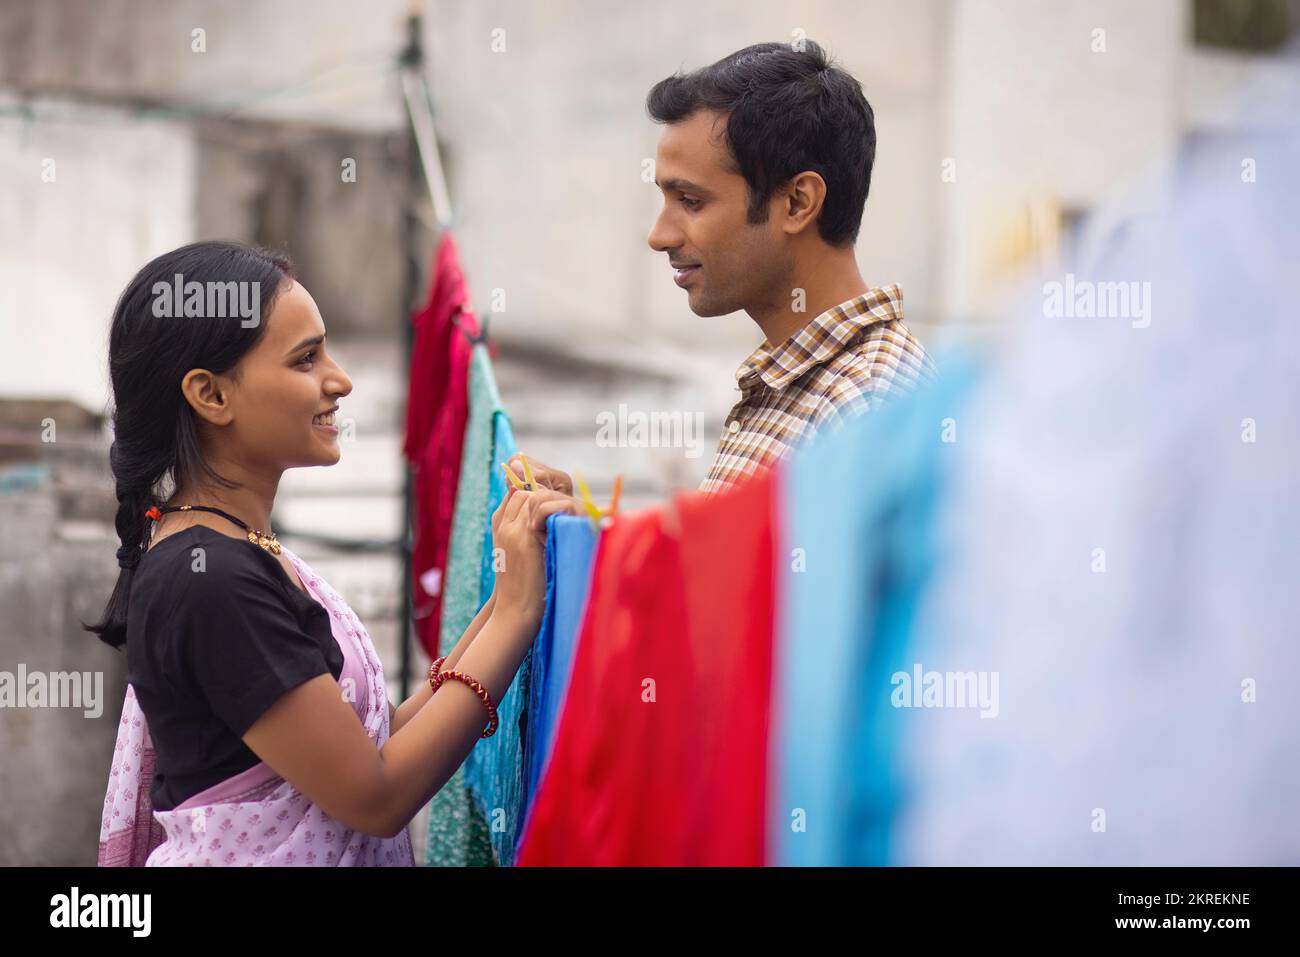 Couple hanging out wet clothes on washing line in the backyard Stock Photo